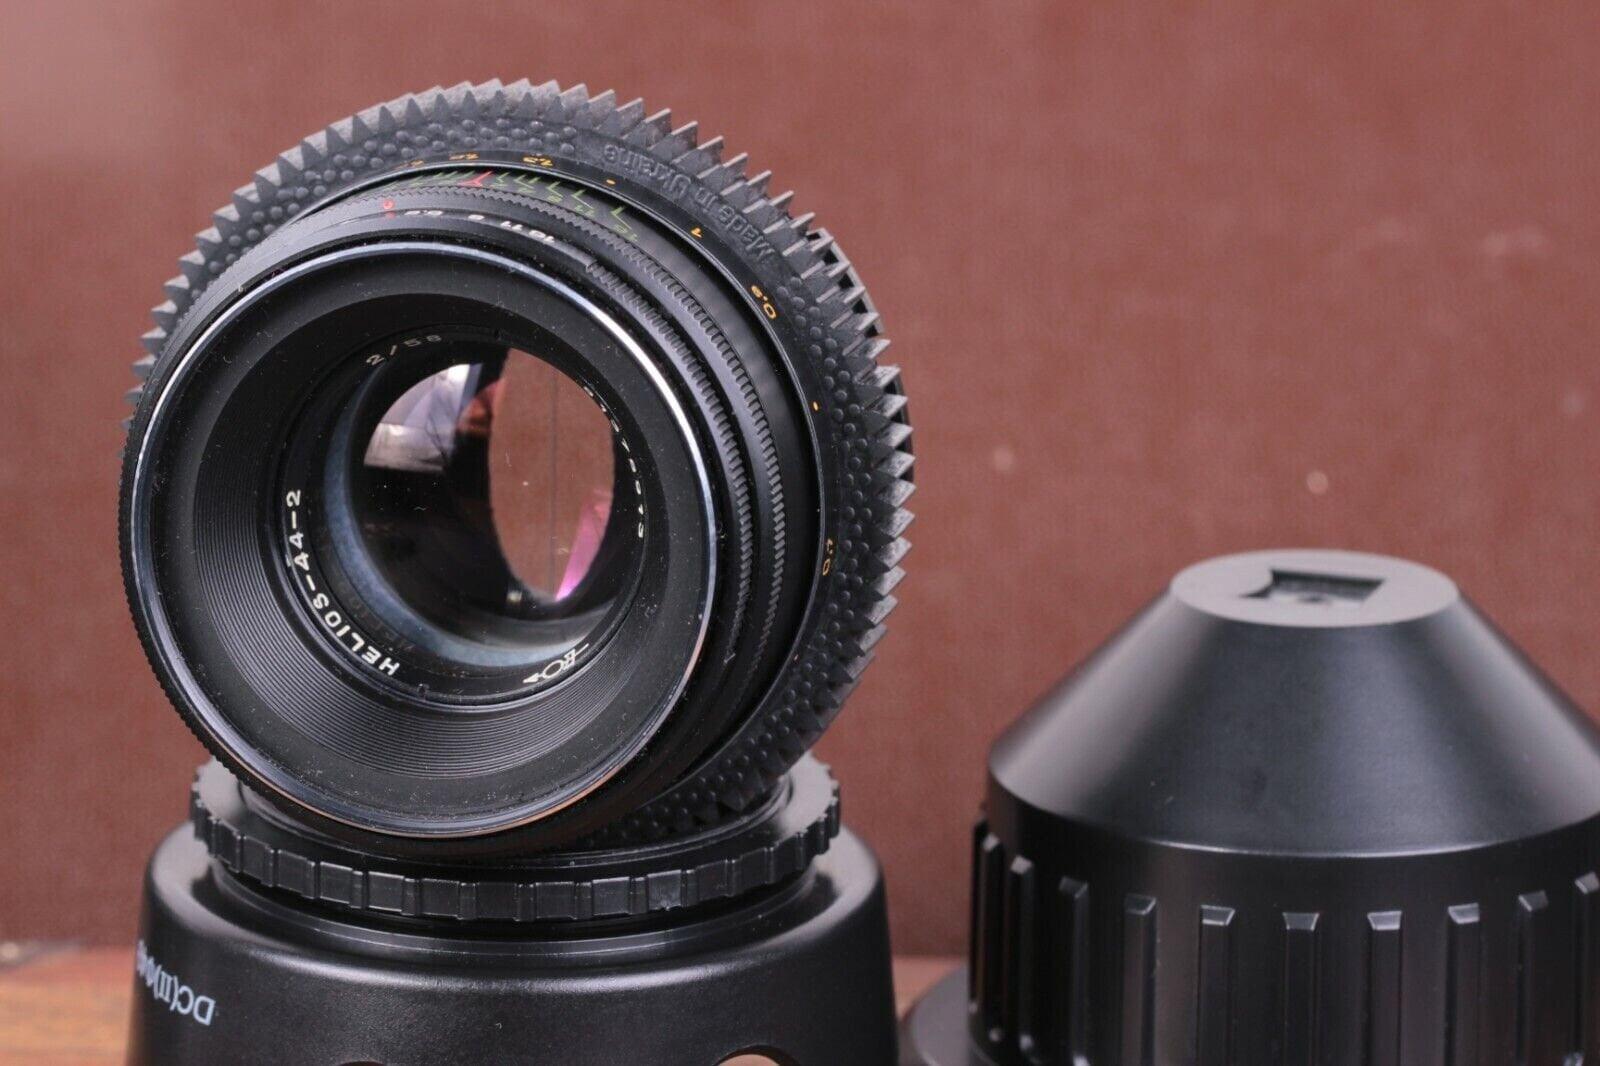 Anamorphic Helios 44-2 Lens Soviet Cine Mod with adapter PL mount.